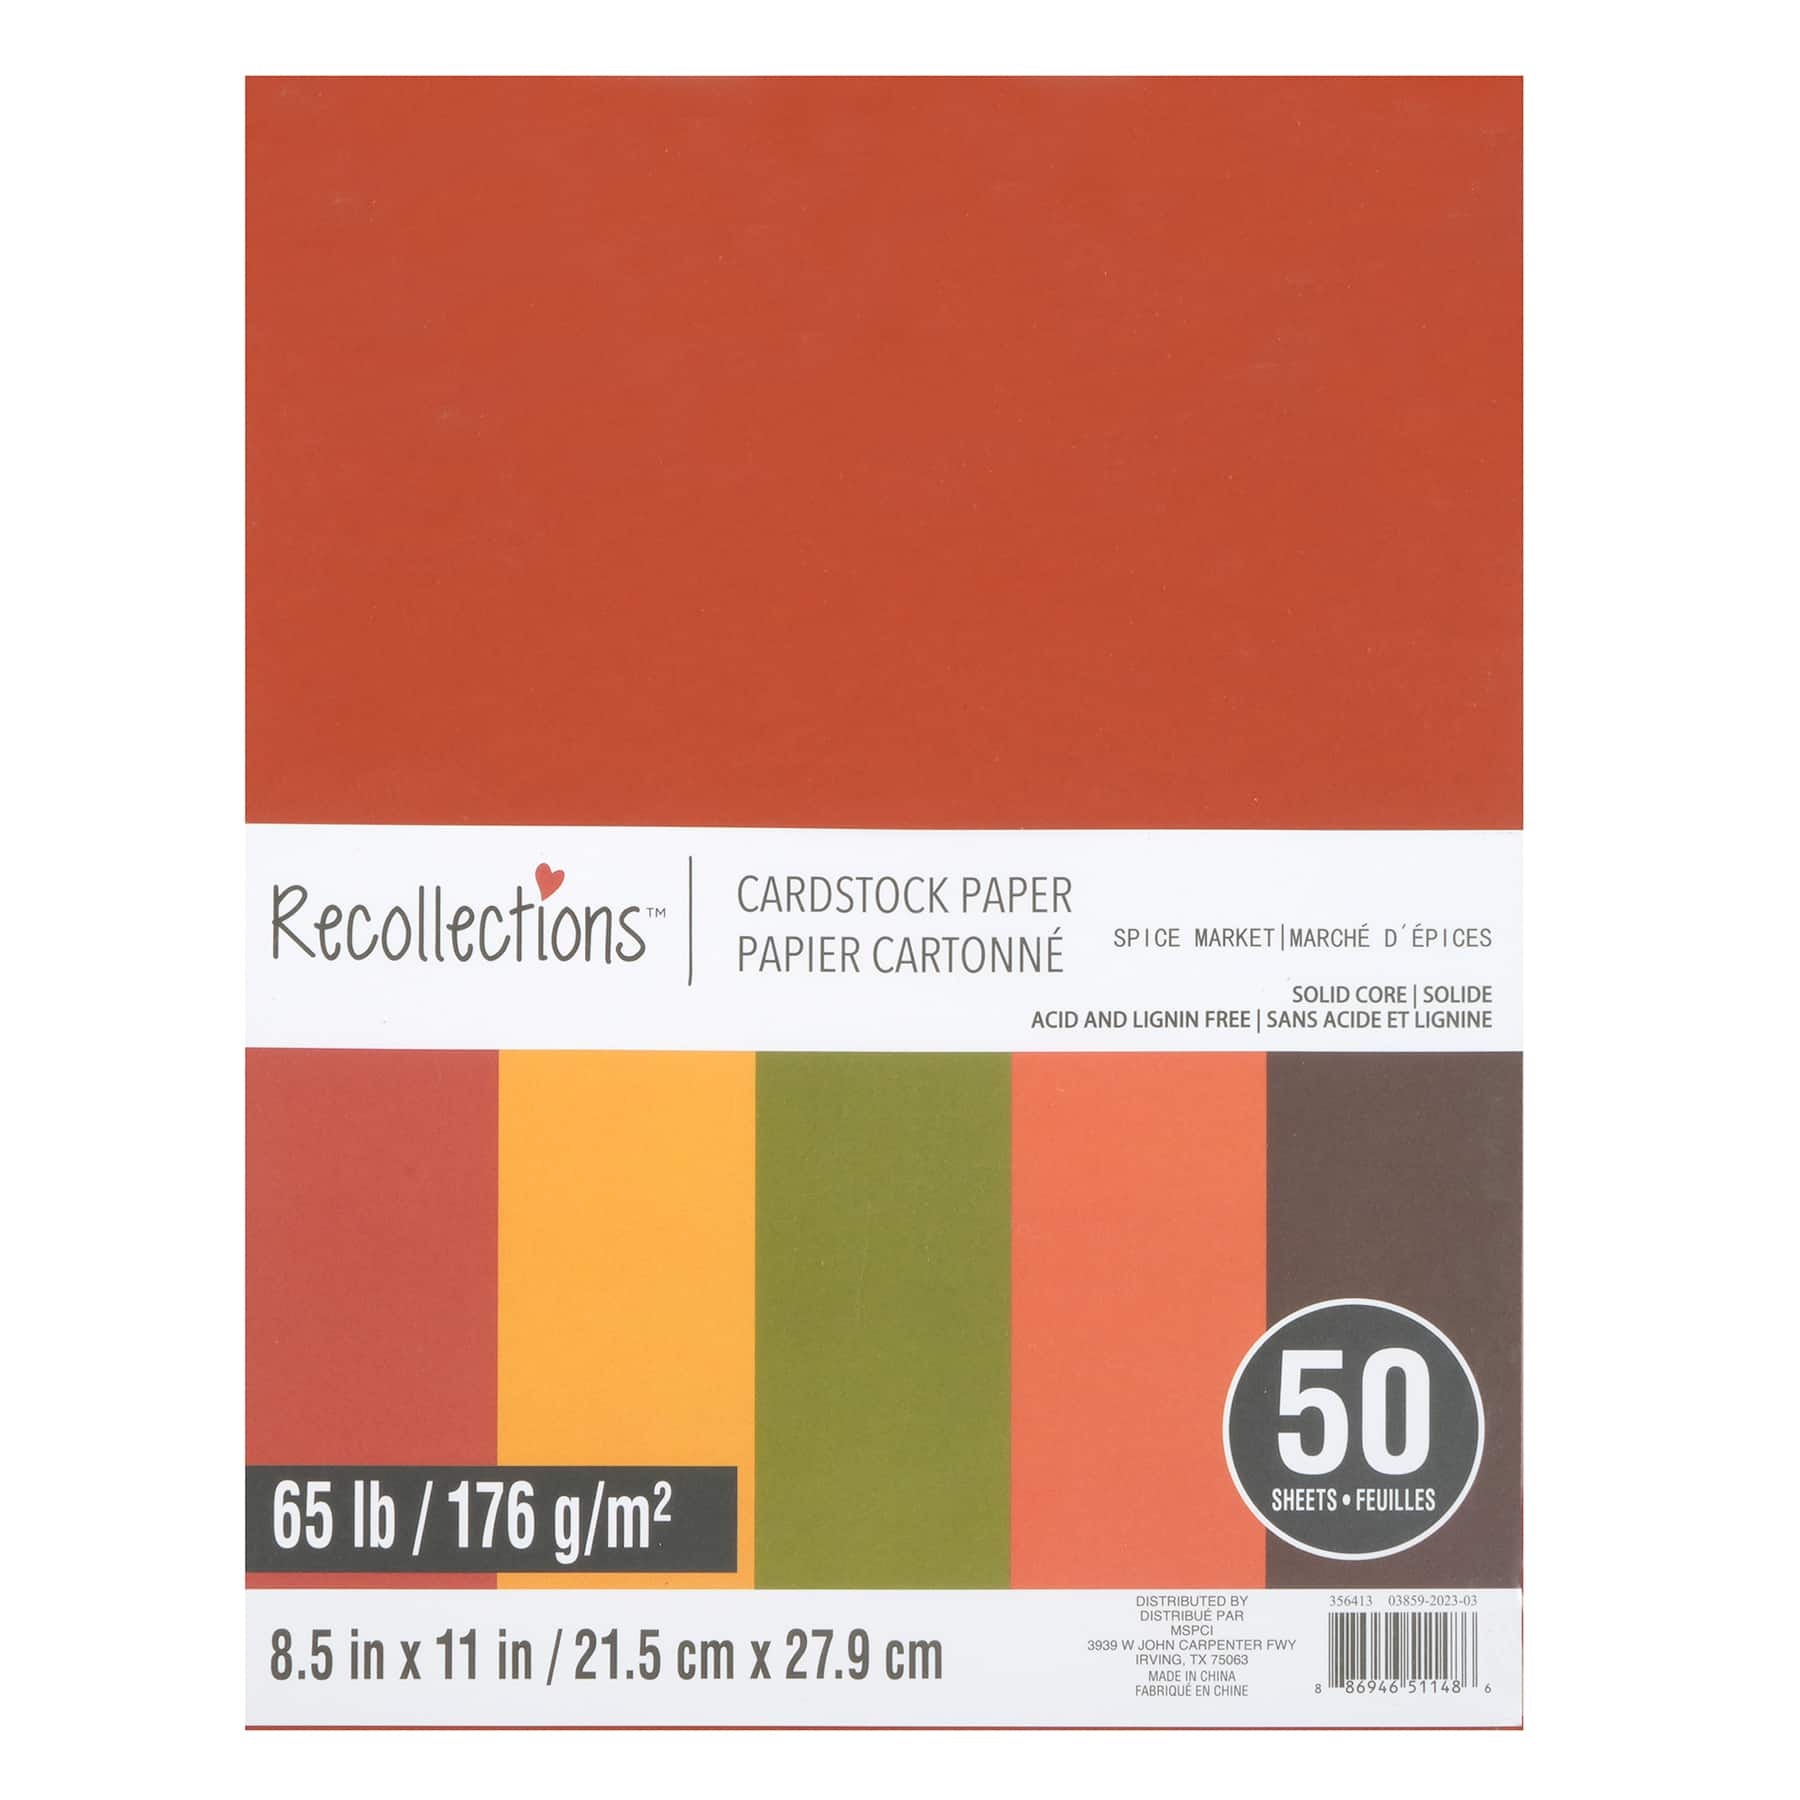 White Glitter Cardstock Paper by Recollections™, 8.5 x 11